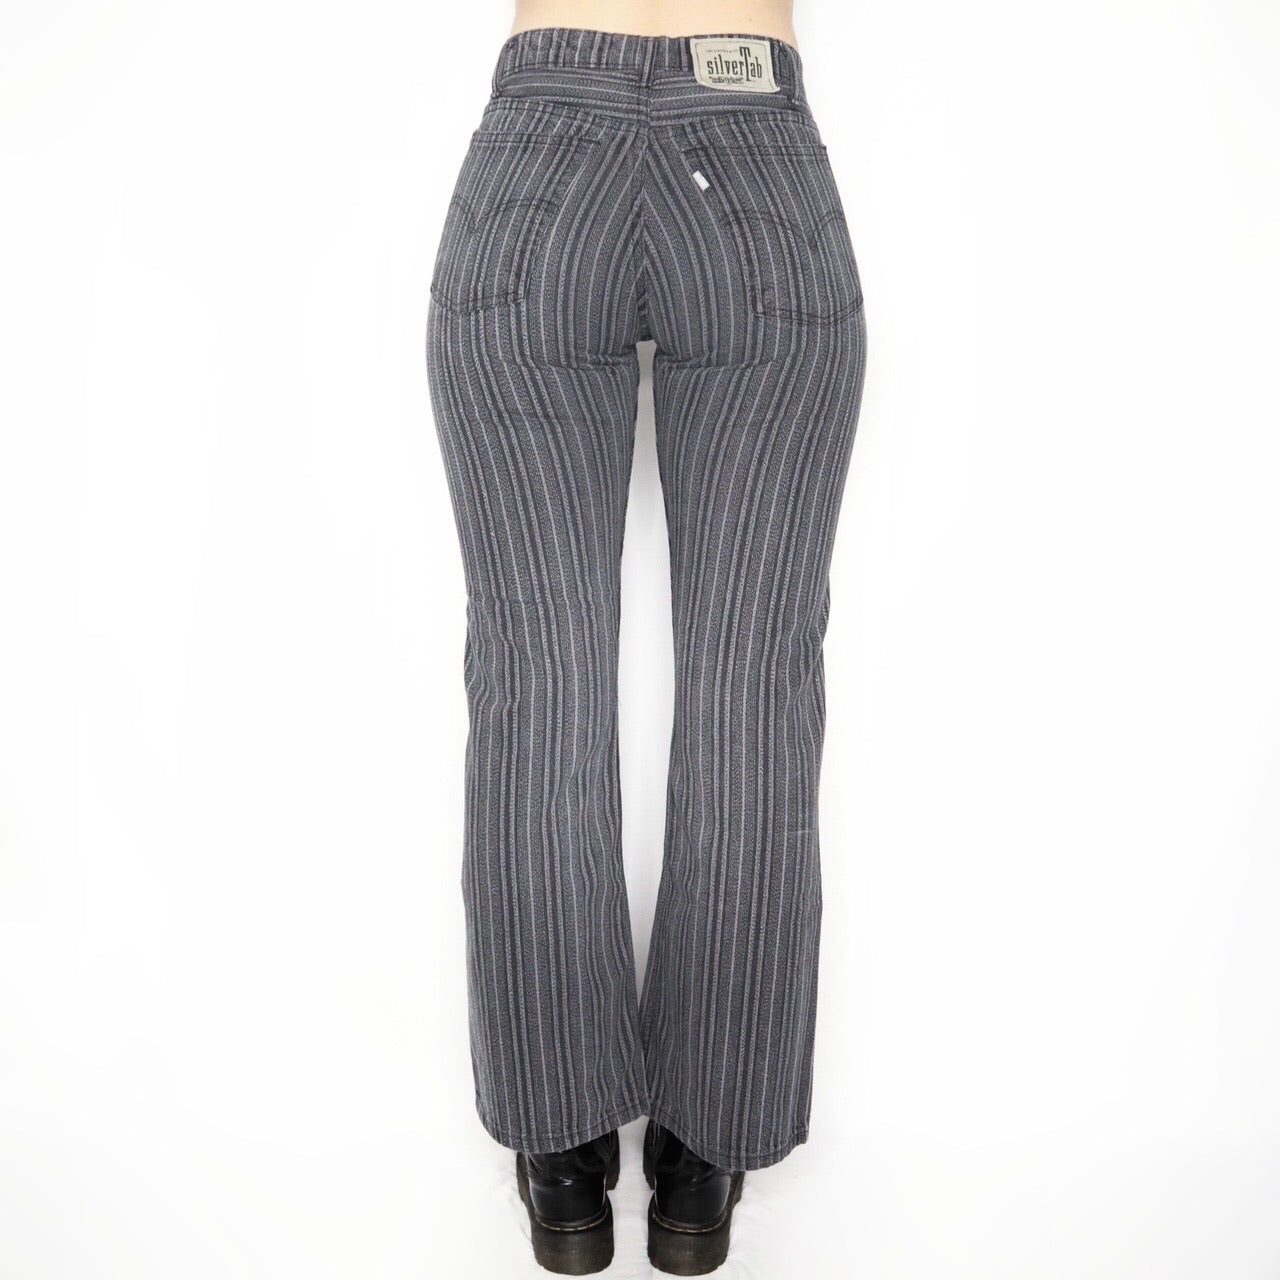 Rare Vintage 90s Striped Silver Tab Flare Levis